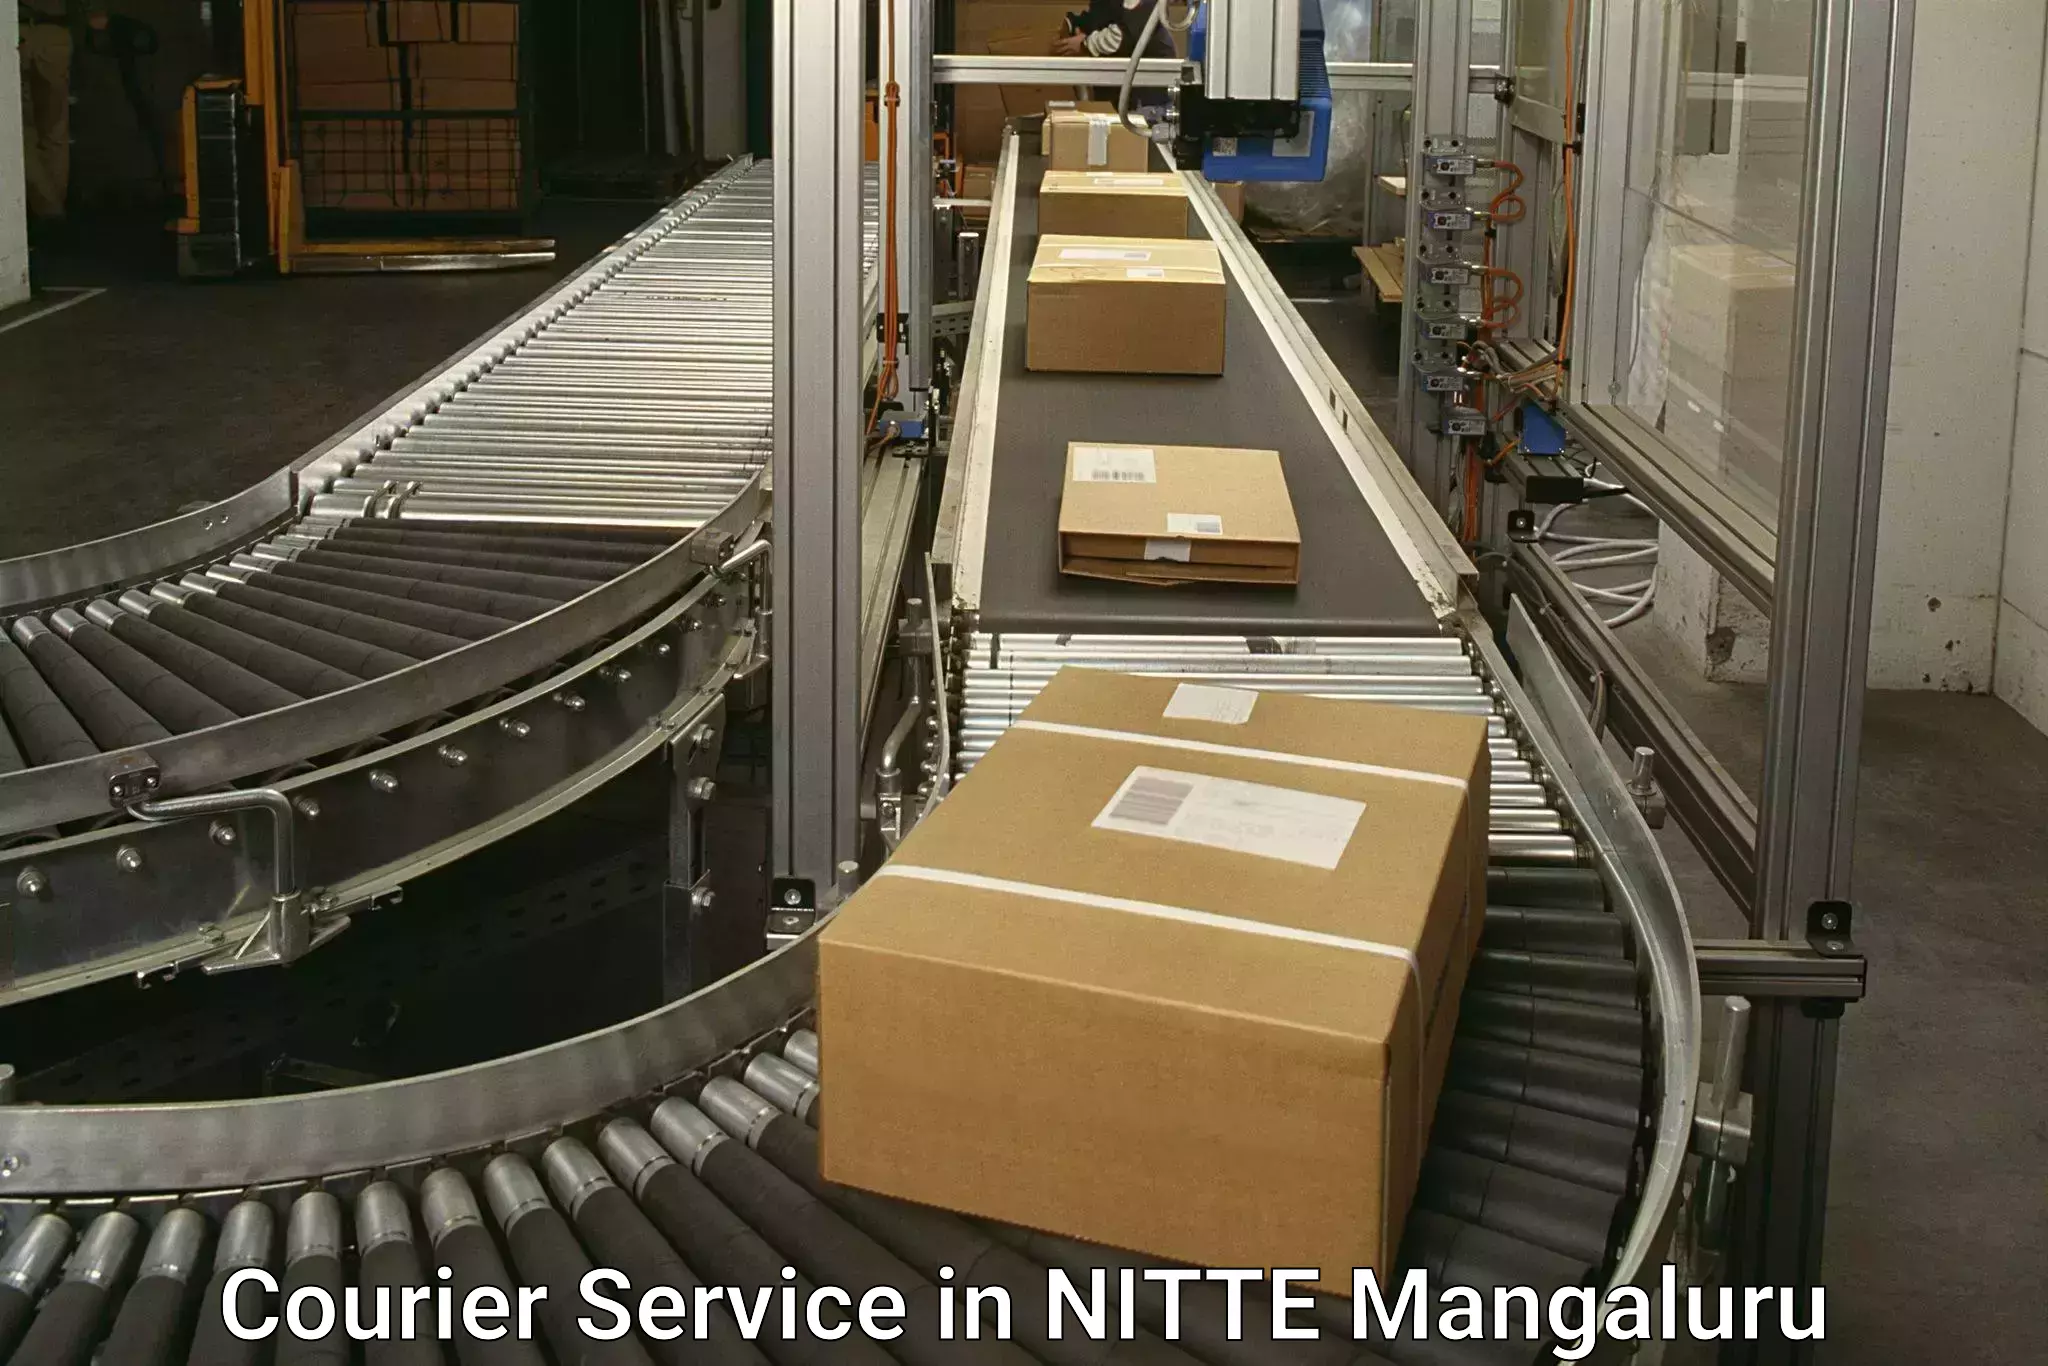 State-of-the-art courier technology in NITTE Mangaluru